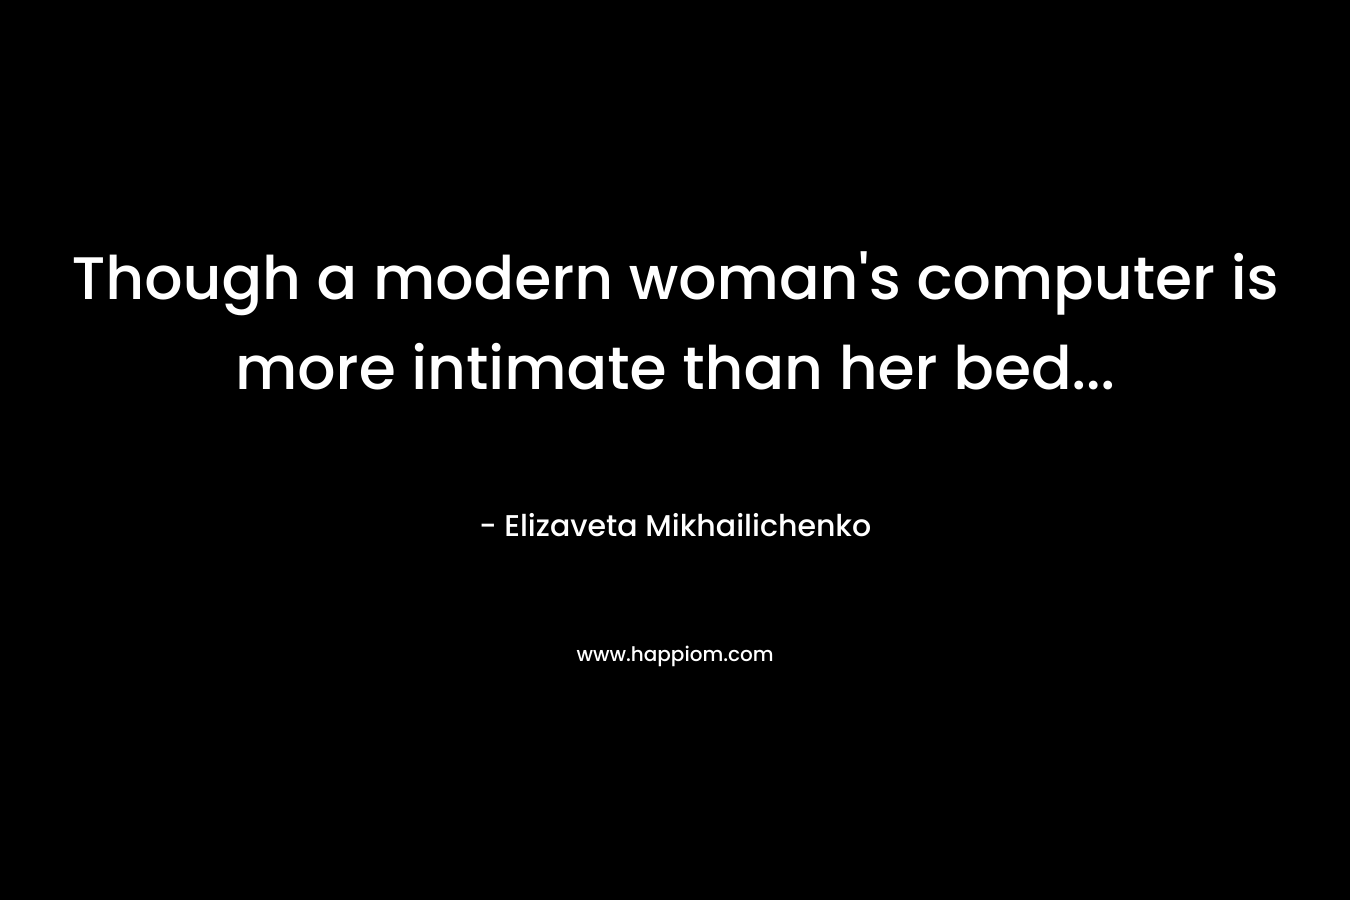 Though a modern woman's computer is more intimate than her bed...